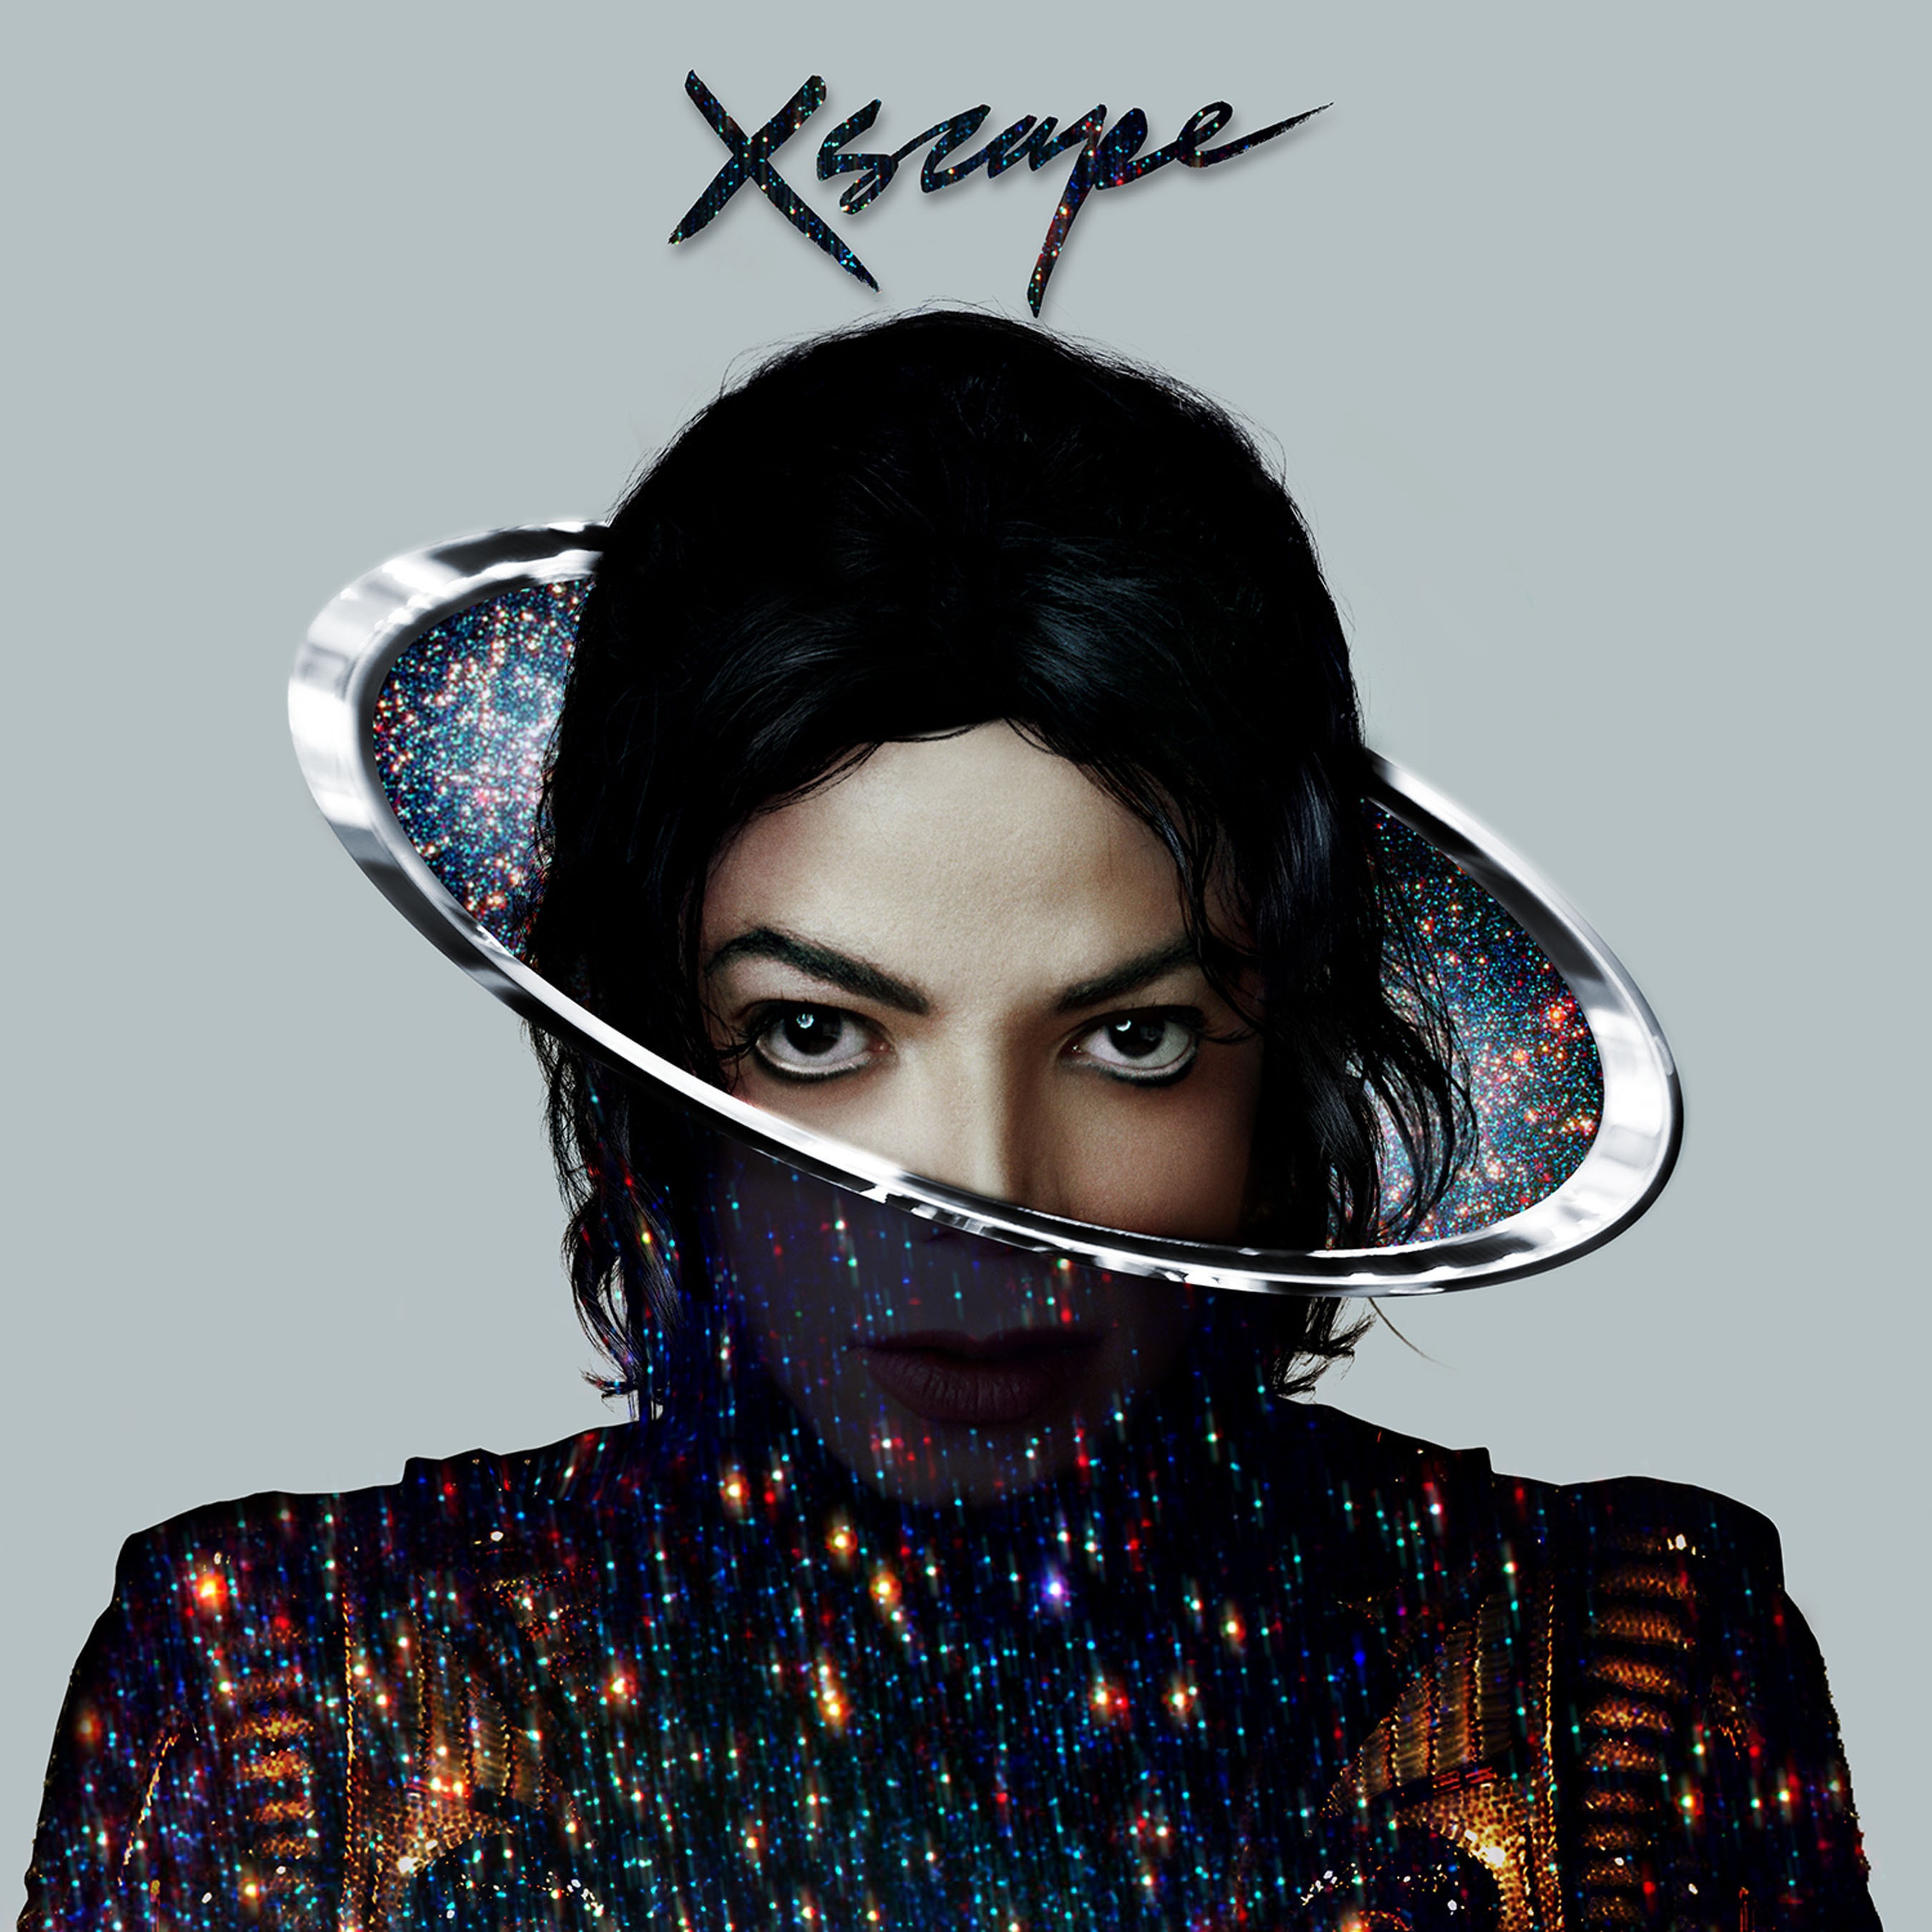 XSCAPE, an album with new songs by Michael Jackson, will be released May 13th by Epic Records (Epic Records—Associated Press)